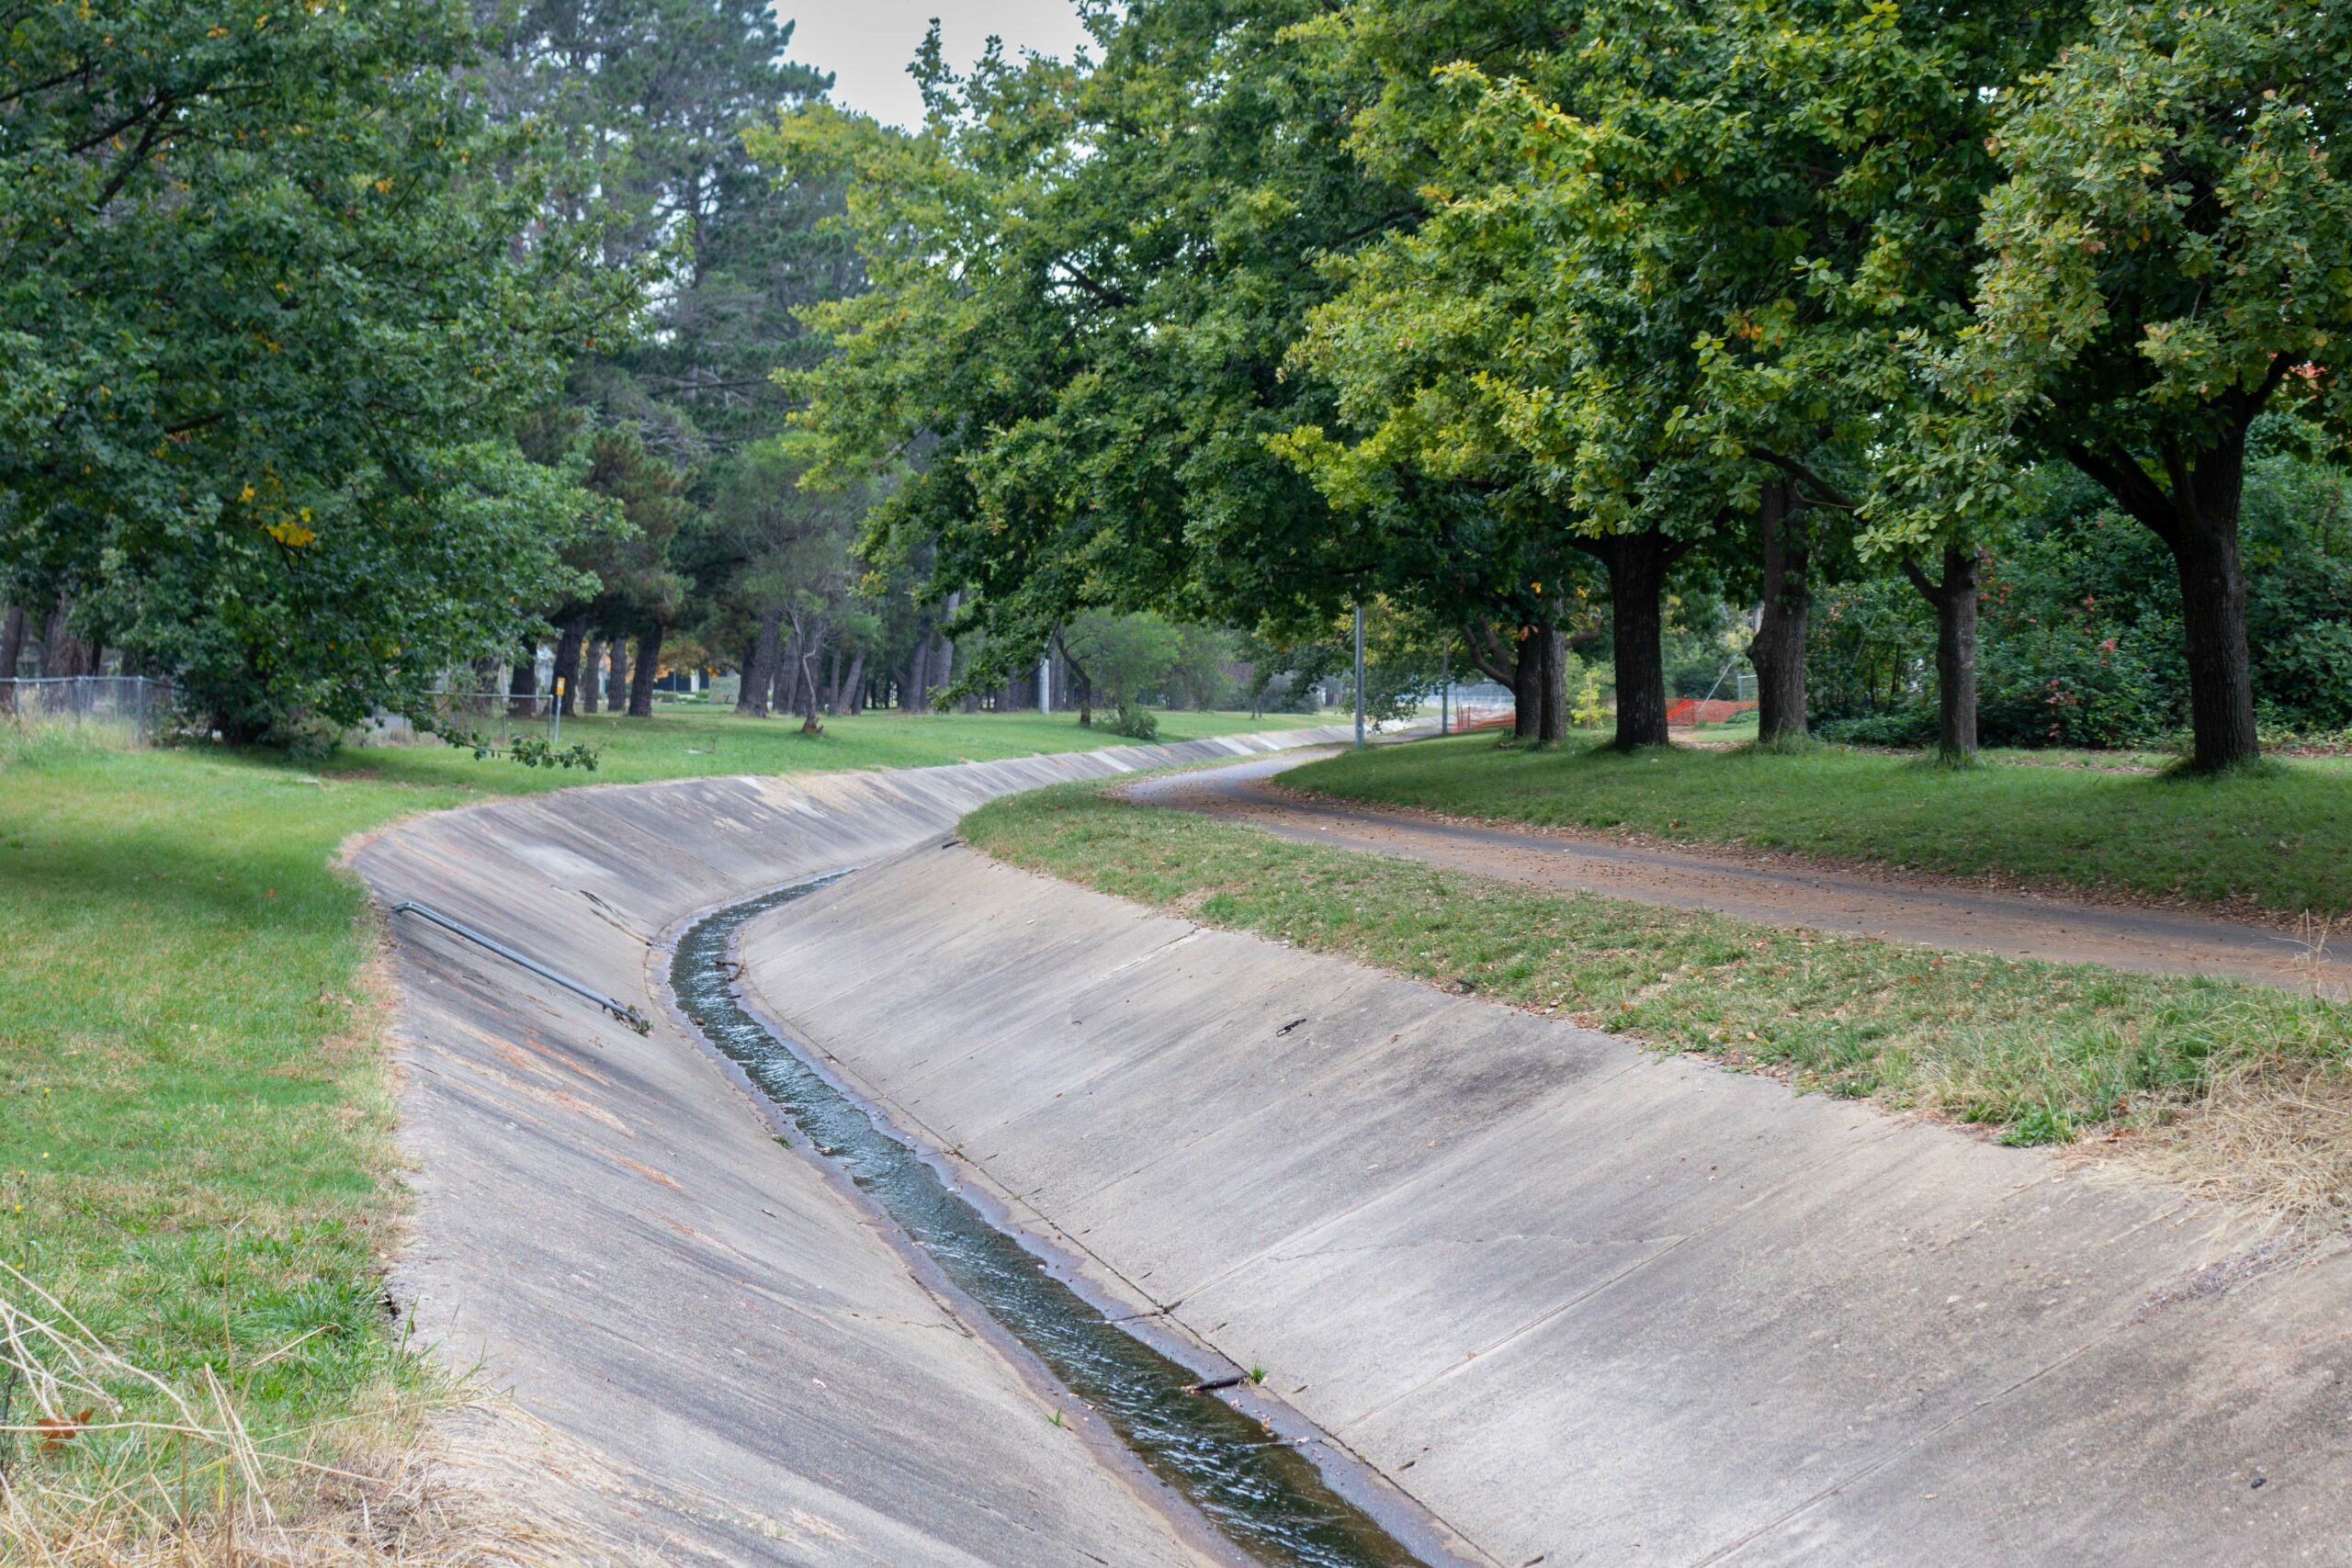 A concrete water channel running through a tree lined areas with a gravel walking track on the right hand side